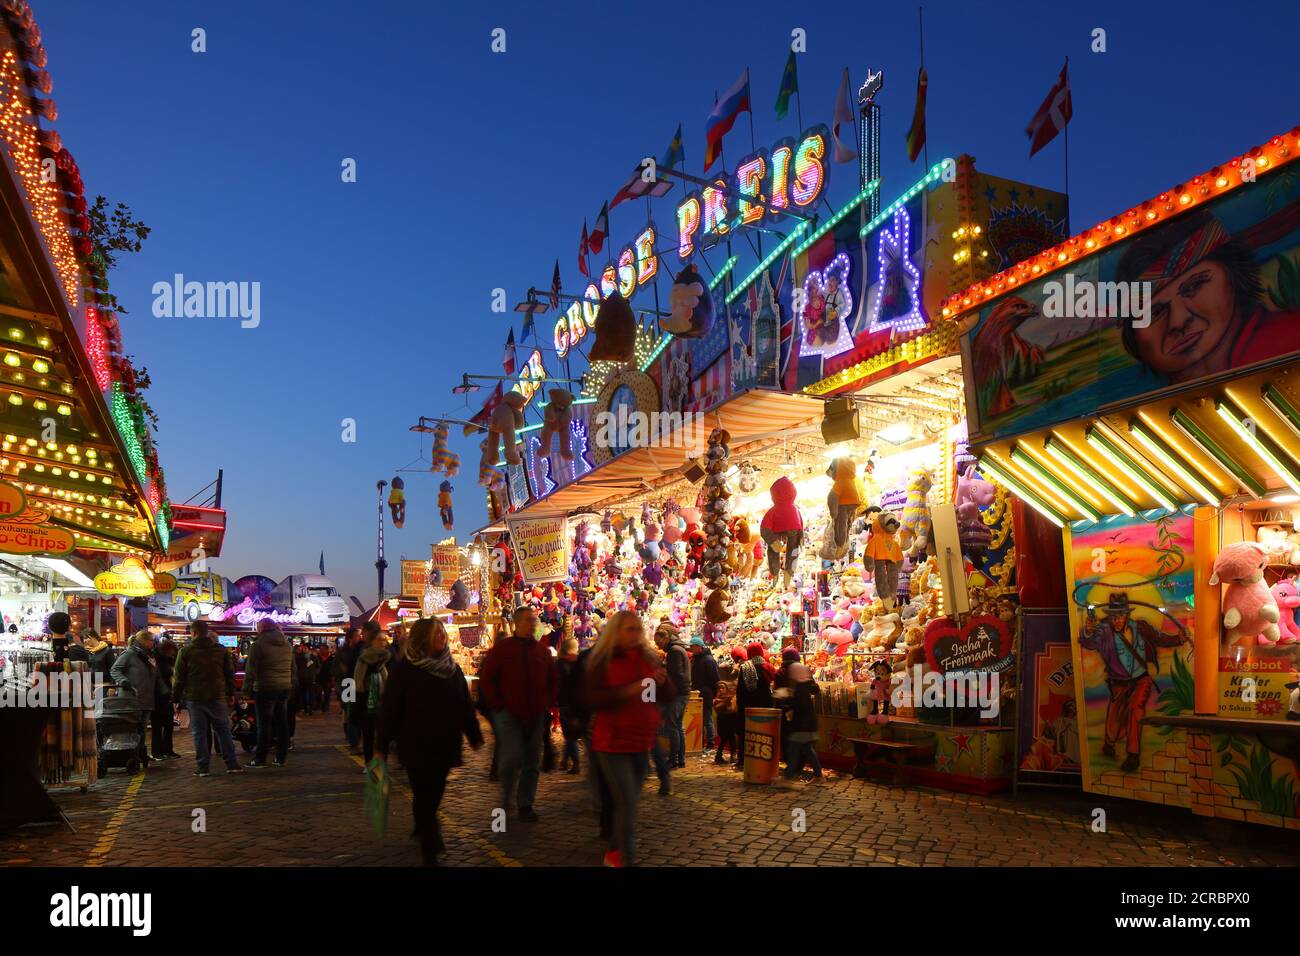 Losbude on the Bremer Freimarkt at dusk, Bremen, Germany, Europe Stock Photo